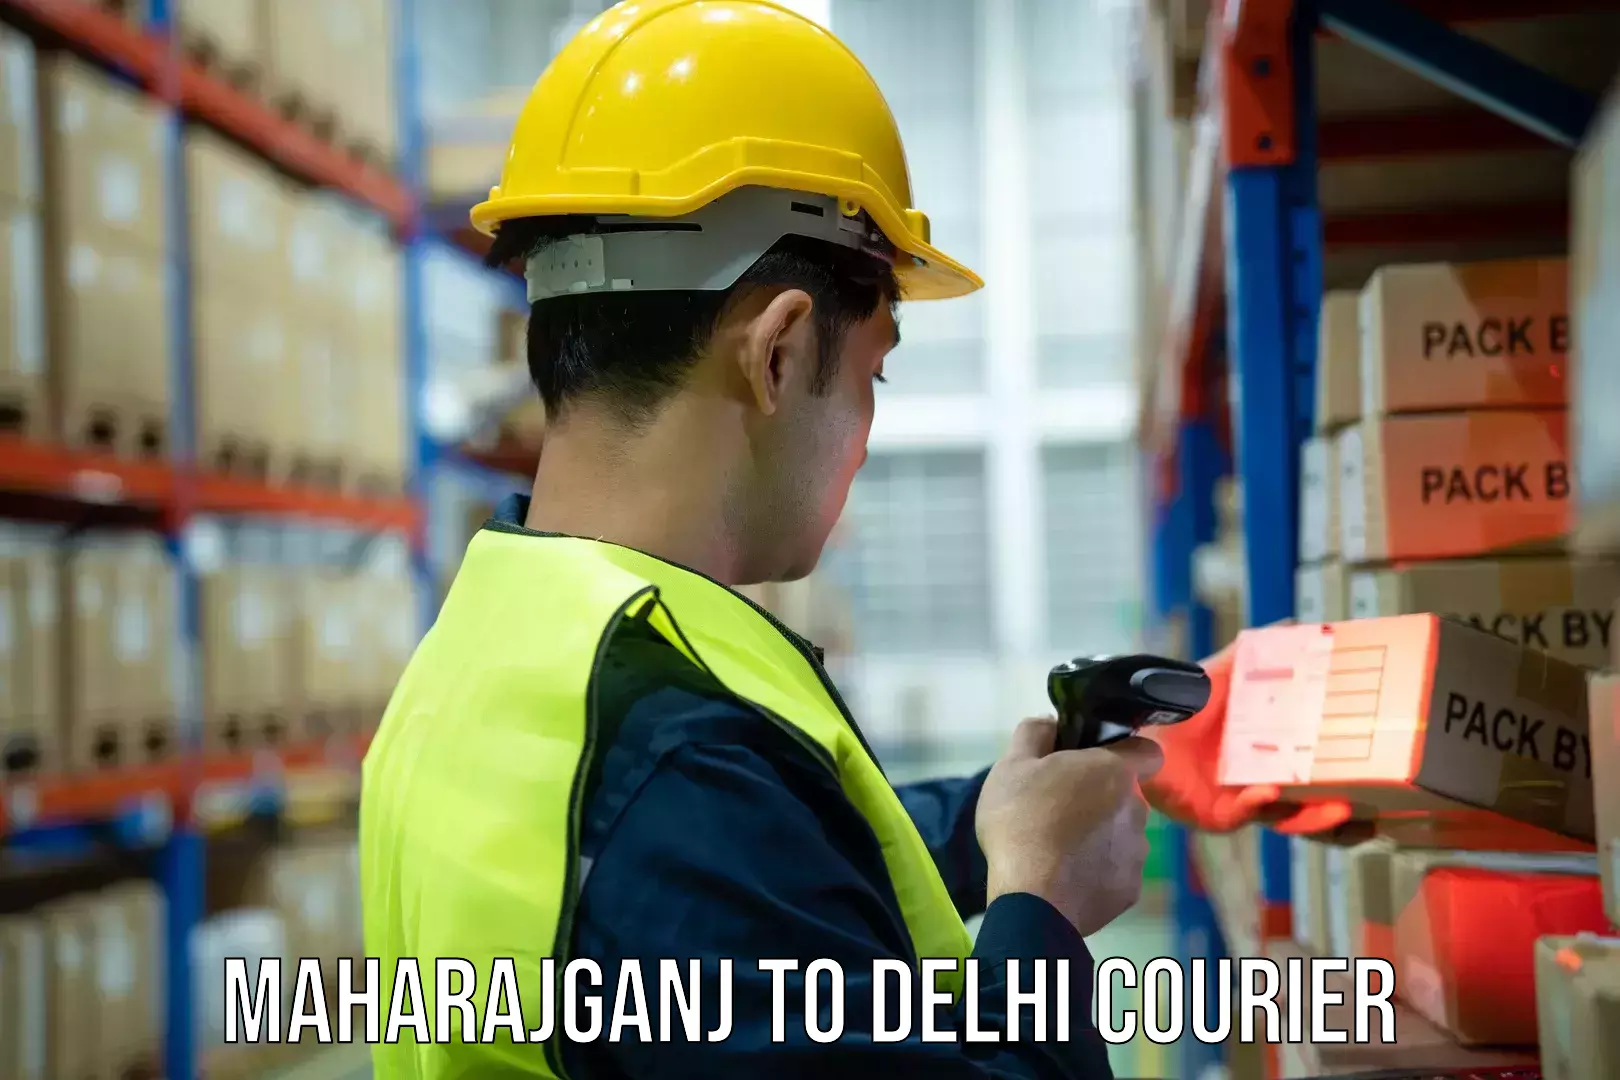 Expedited shipping methods Maharajganj to NCR